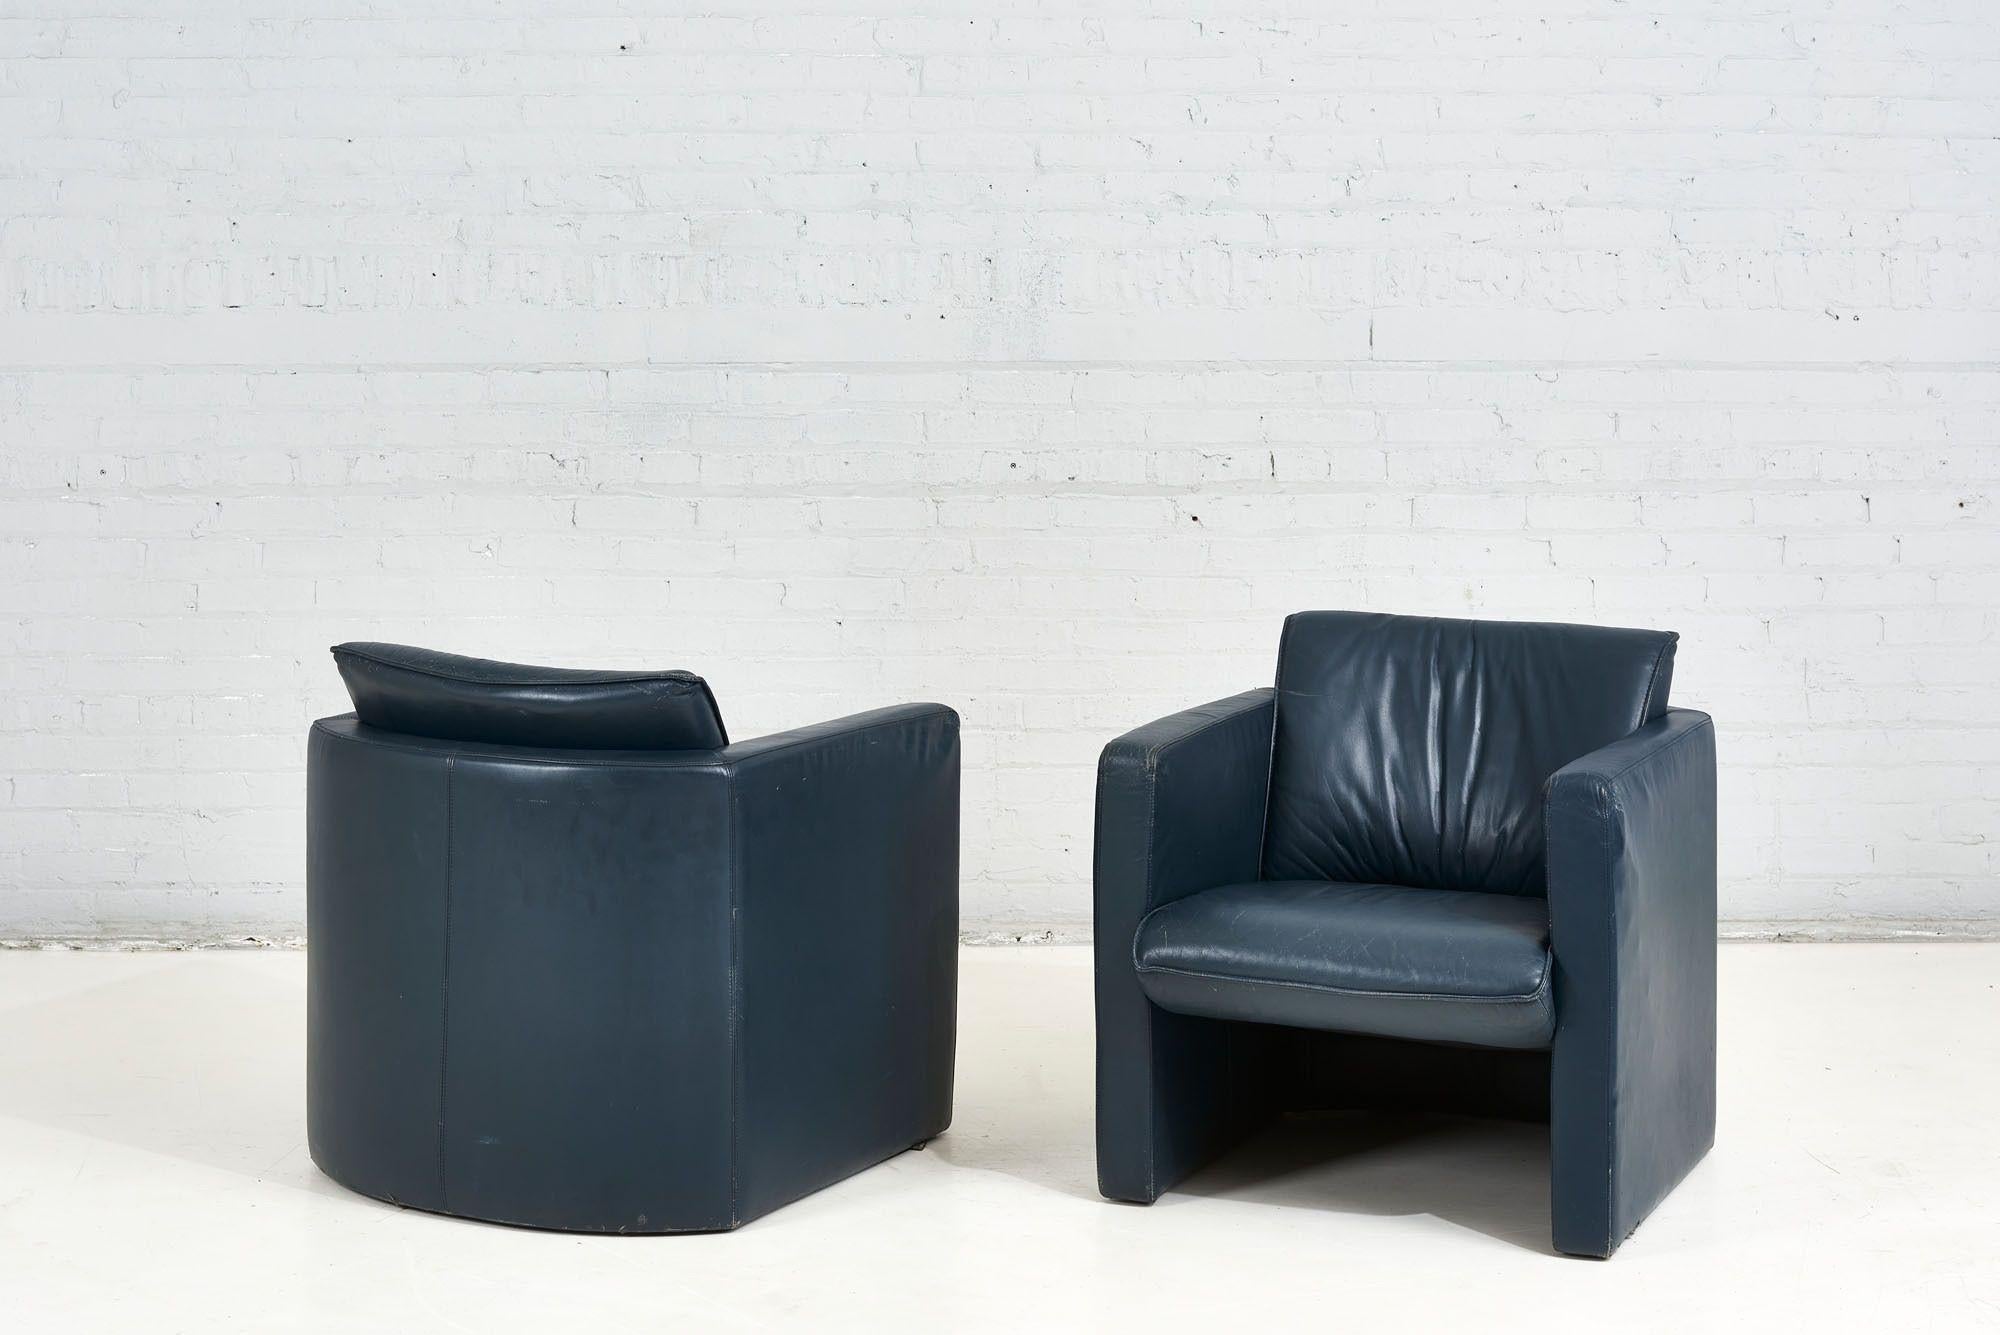 Late 20th Century Post Modern Barrel Leather Chairs by Leolux, 1970 For Sale